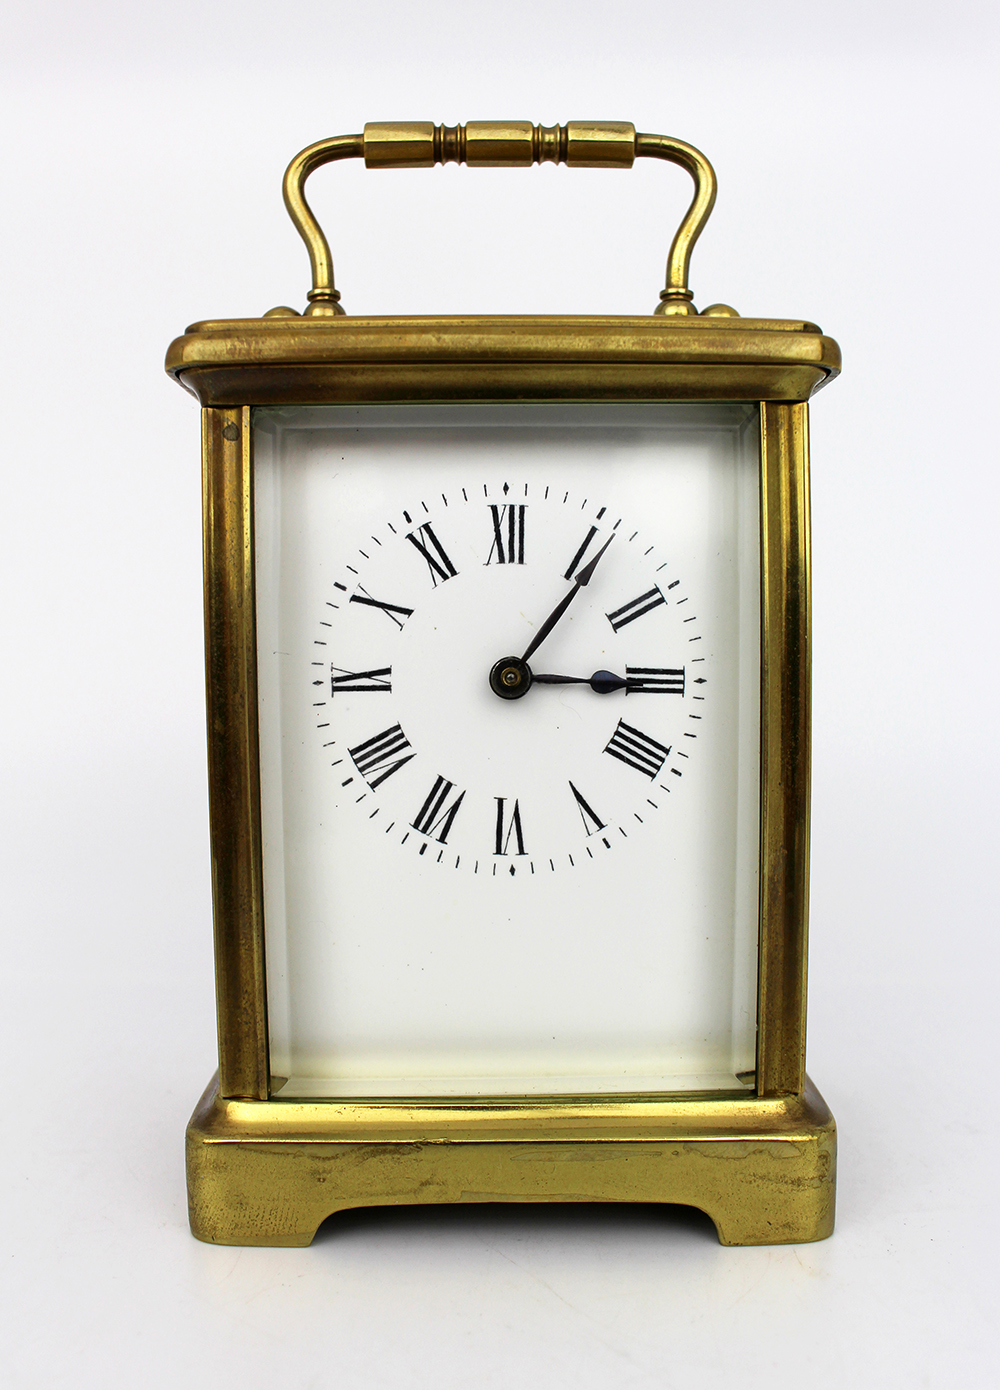 Fine Brass Carriage Clock c.1910 With Travelling Case